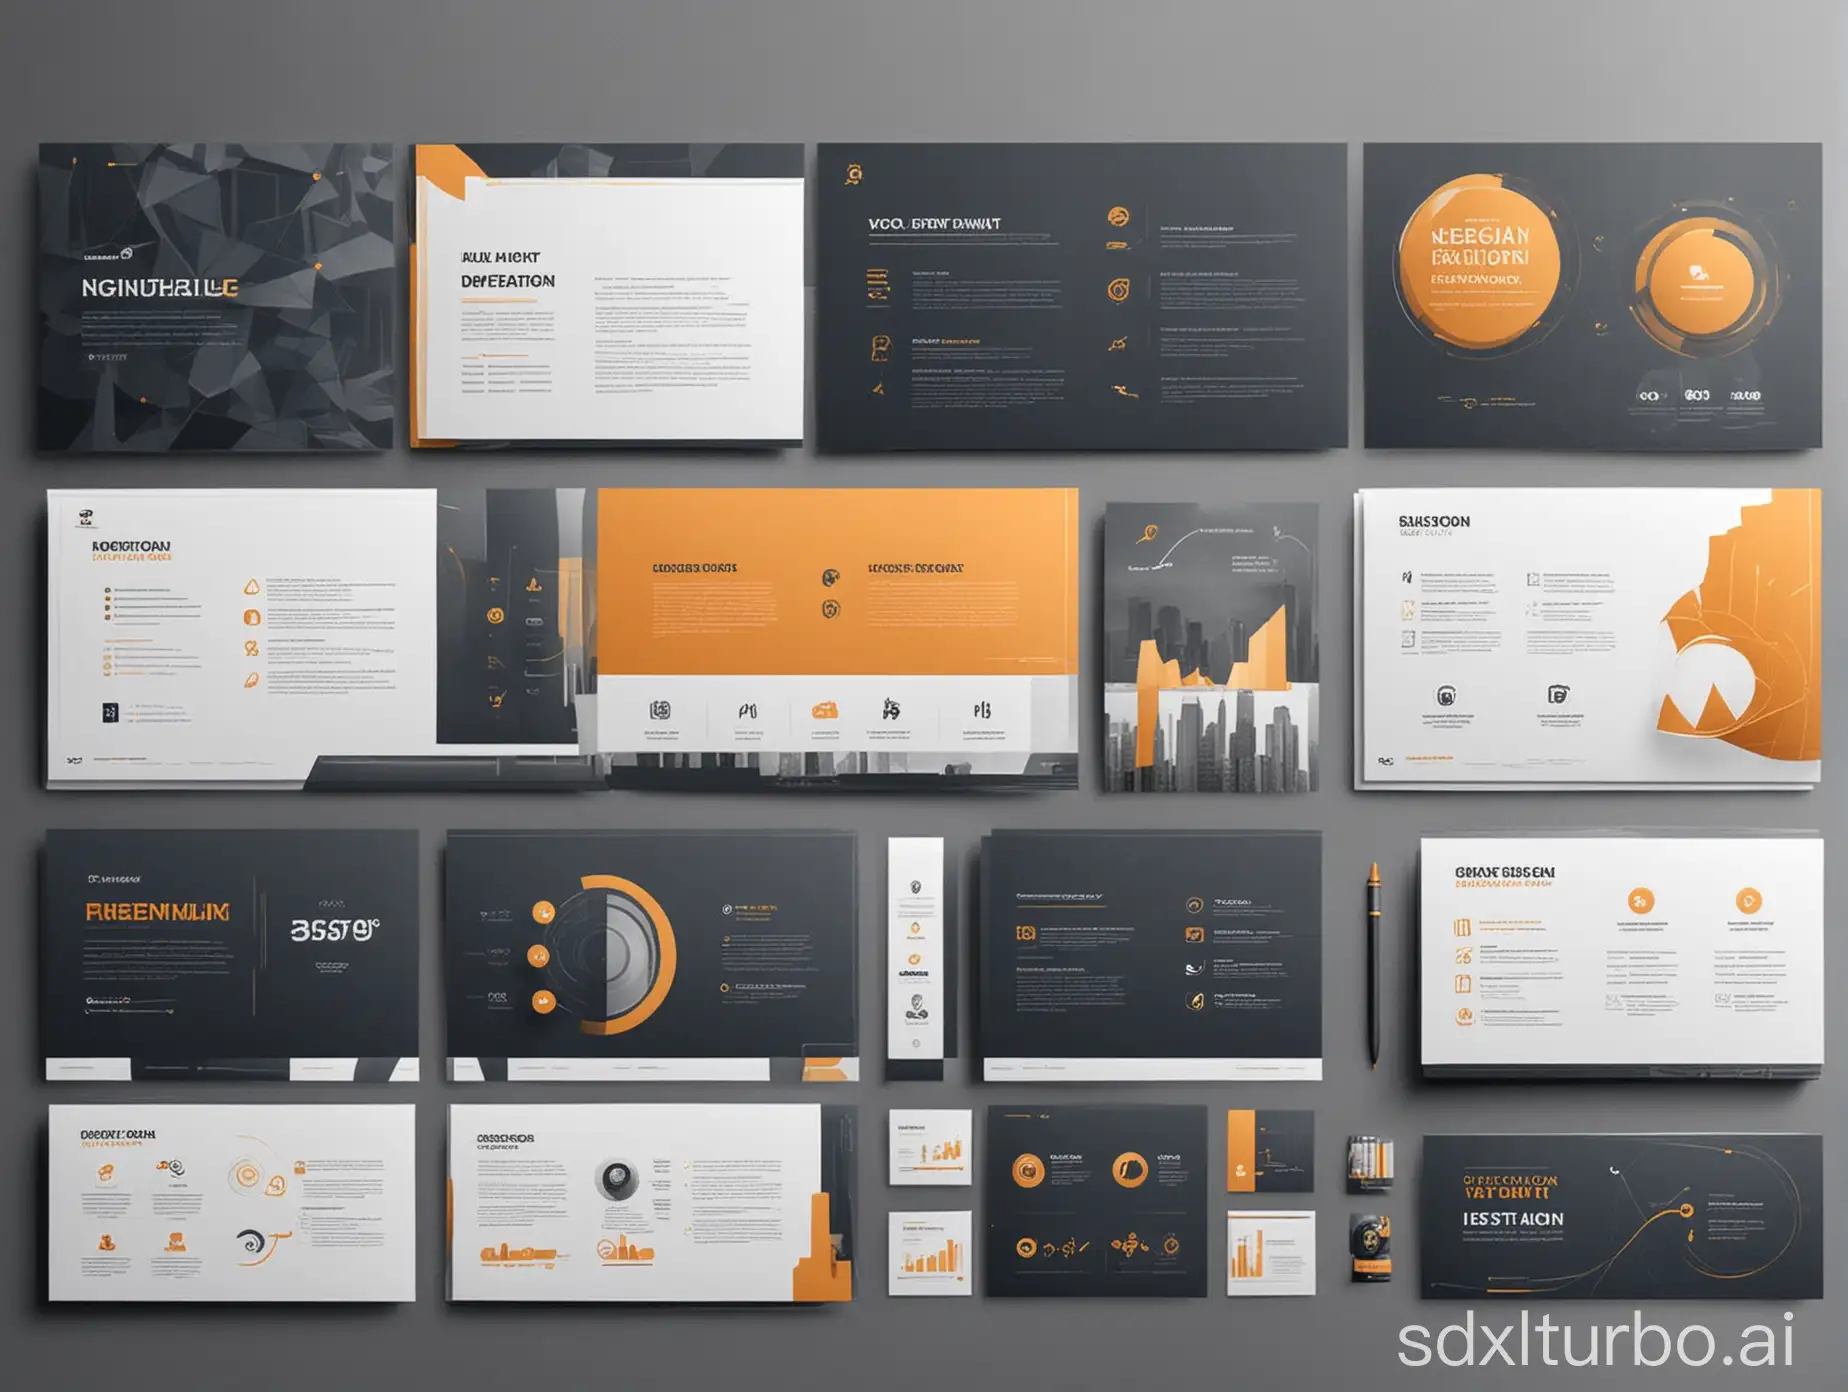 Modern-Business-Presentation-with-Professional-Design-Elements